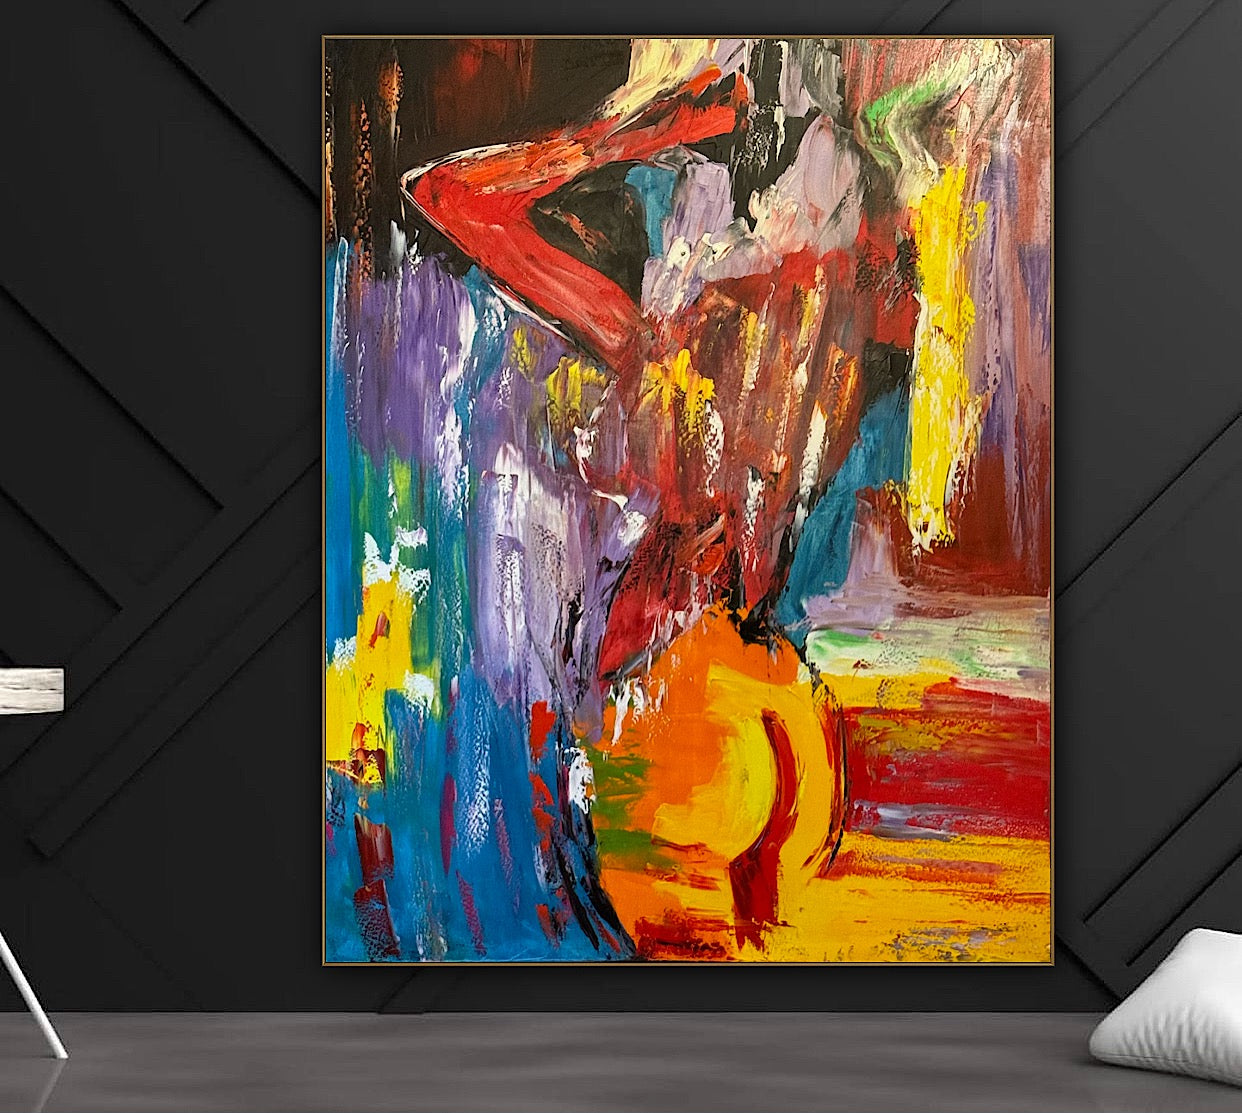 Nude love original abstract oil painting on canvas 100 x 80cm